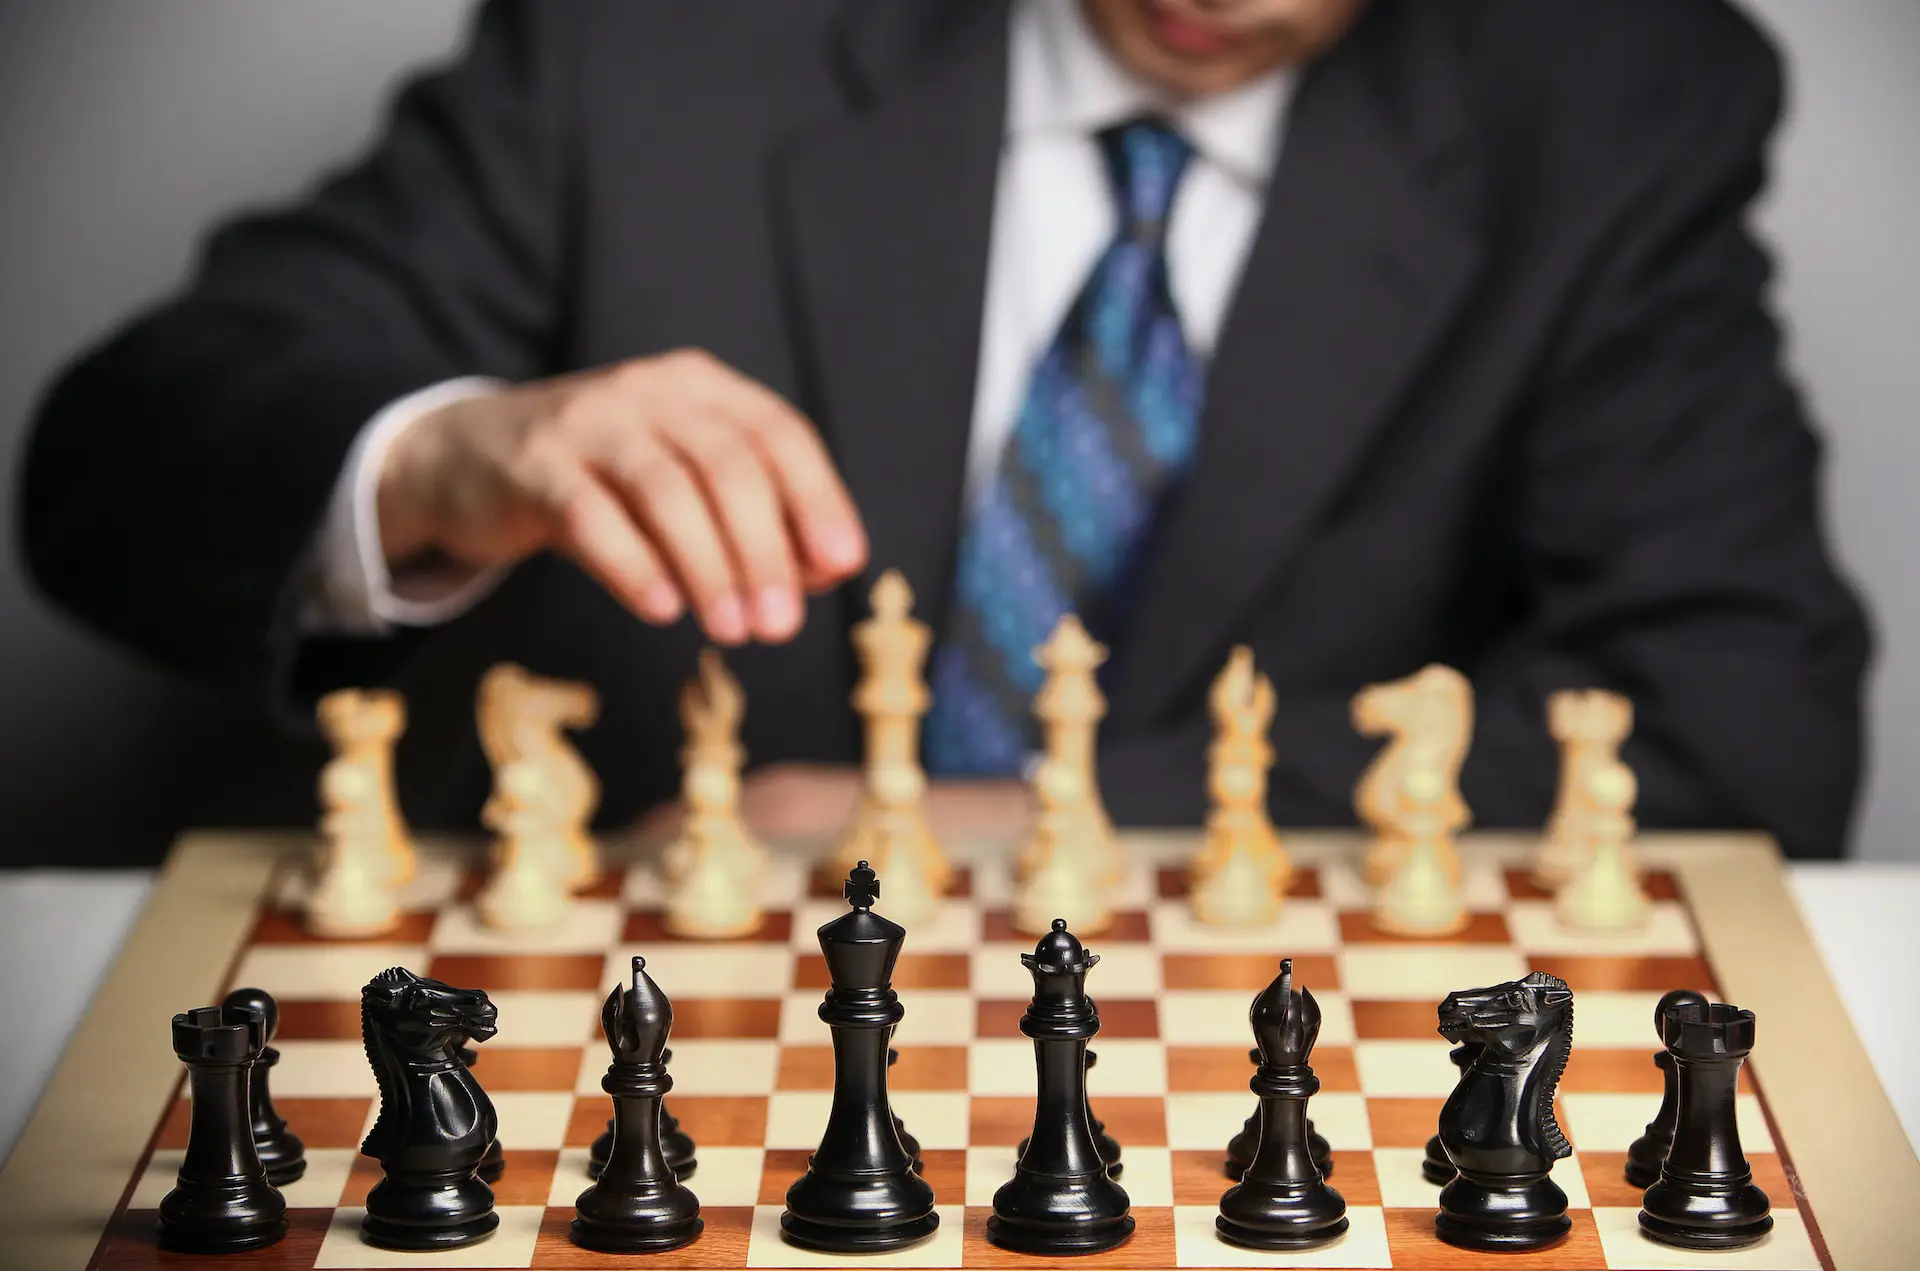 How much do professional chess players make